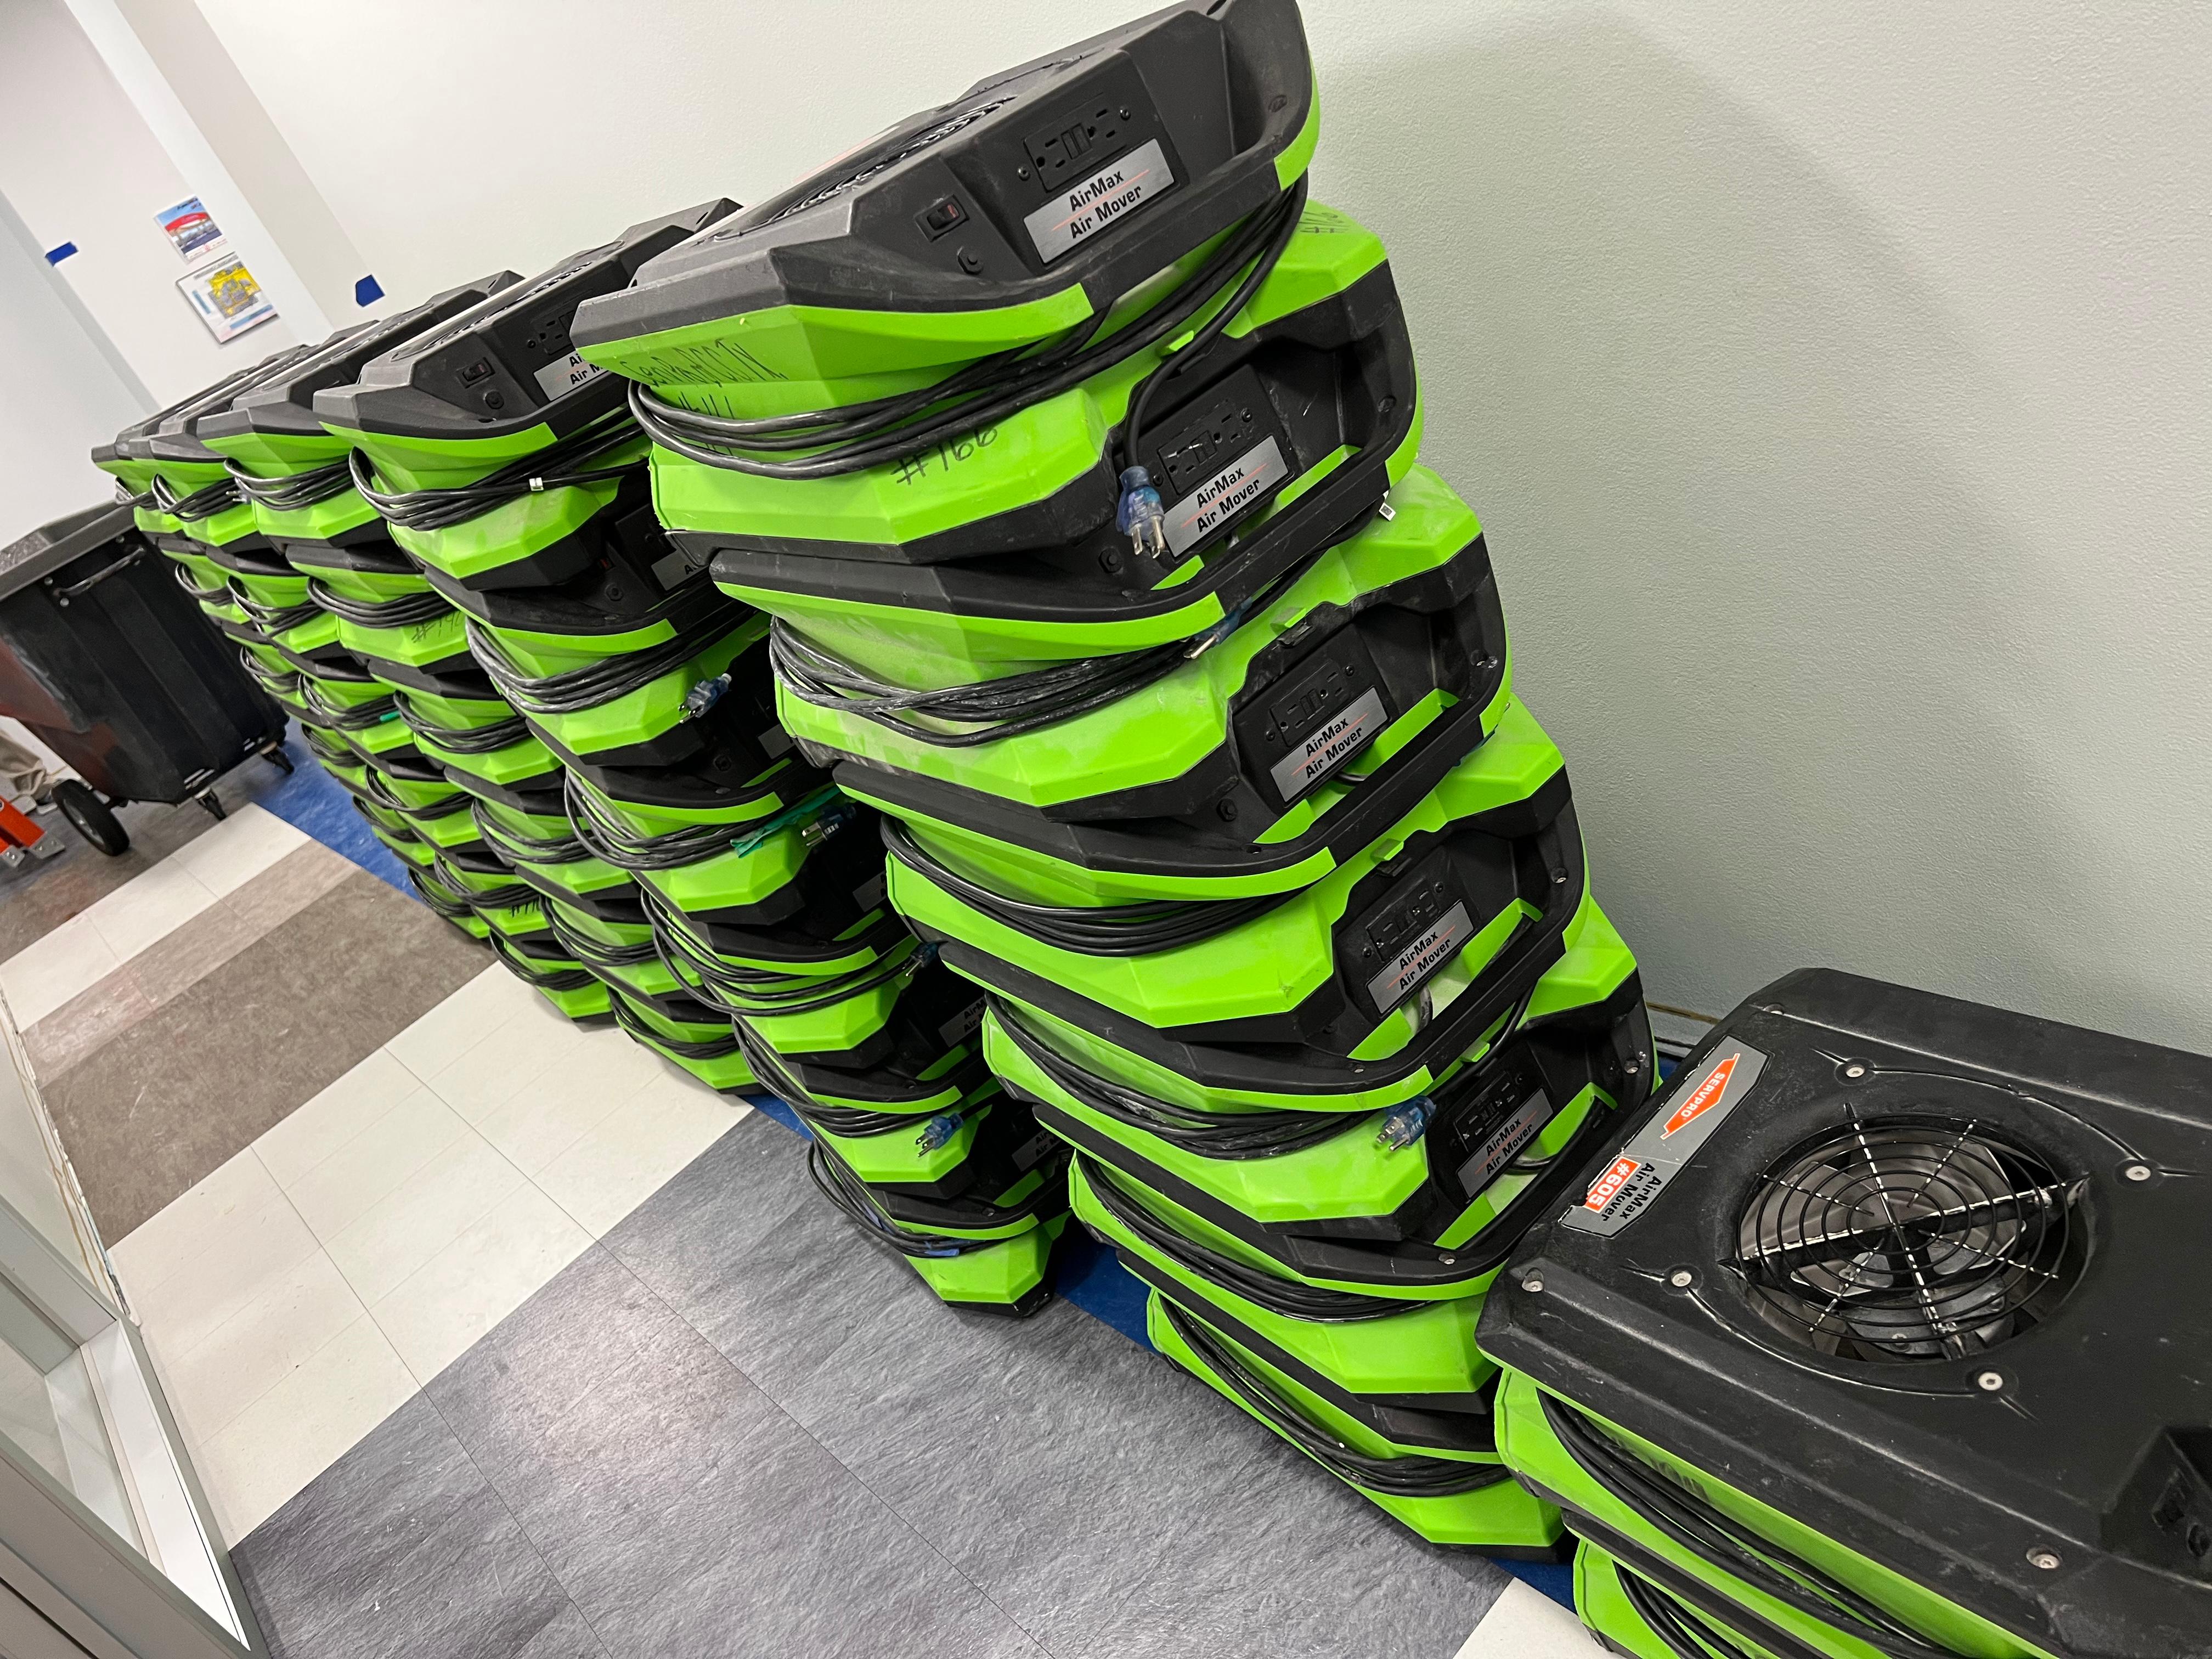 A stack of SERVPRO air movers was delivered to the work site and are ready to be deployed.